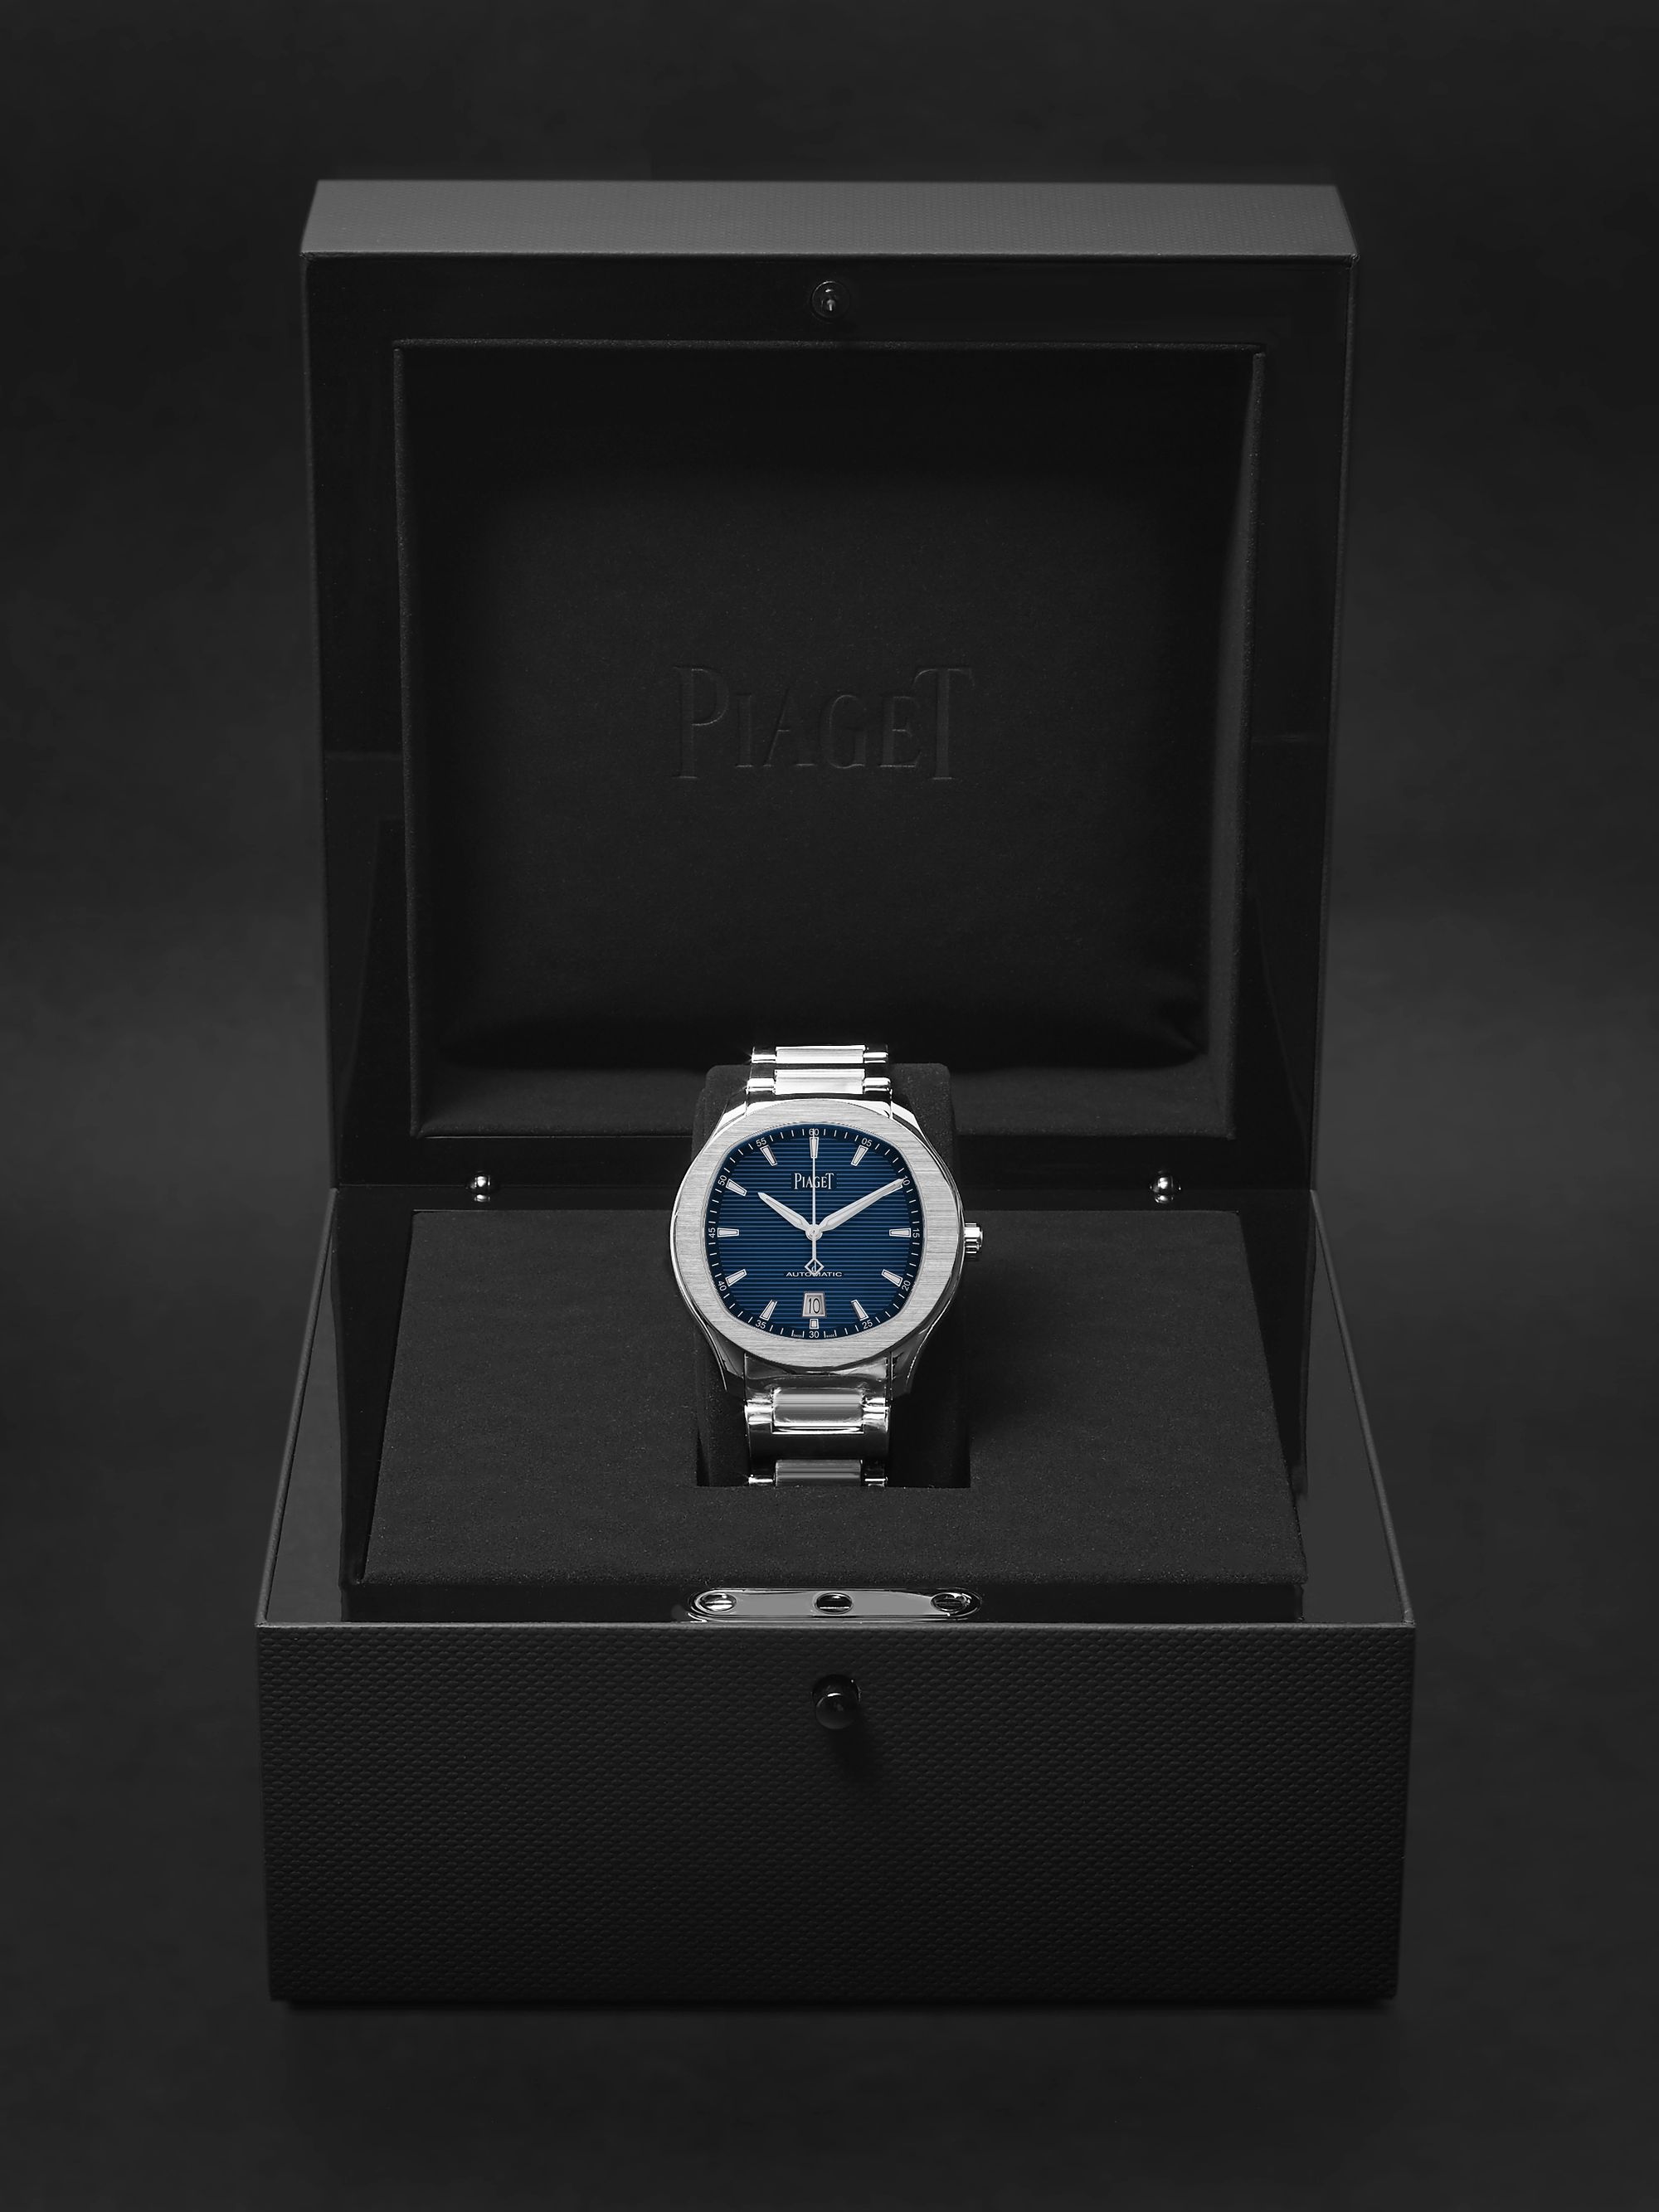 PIAGET Polo Automatic 42mm Stainless Steel Watch, Ref. No. G0A41002